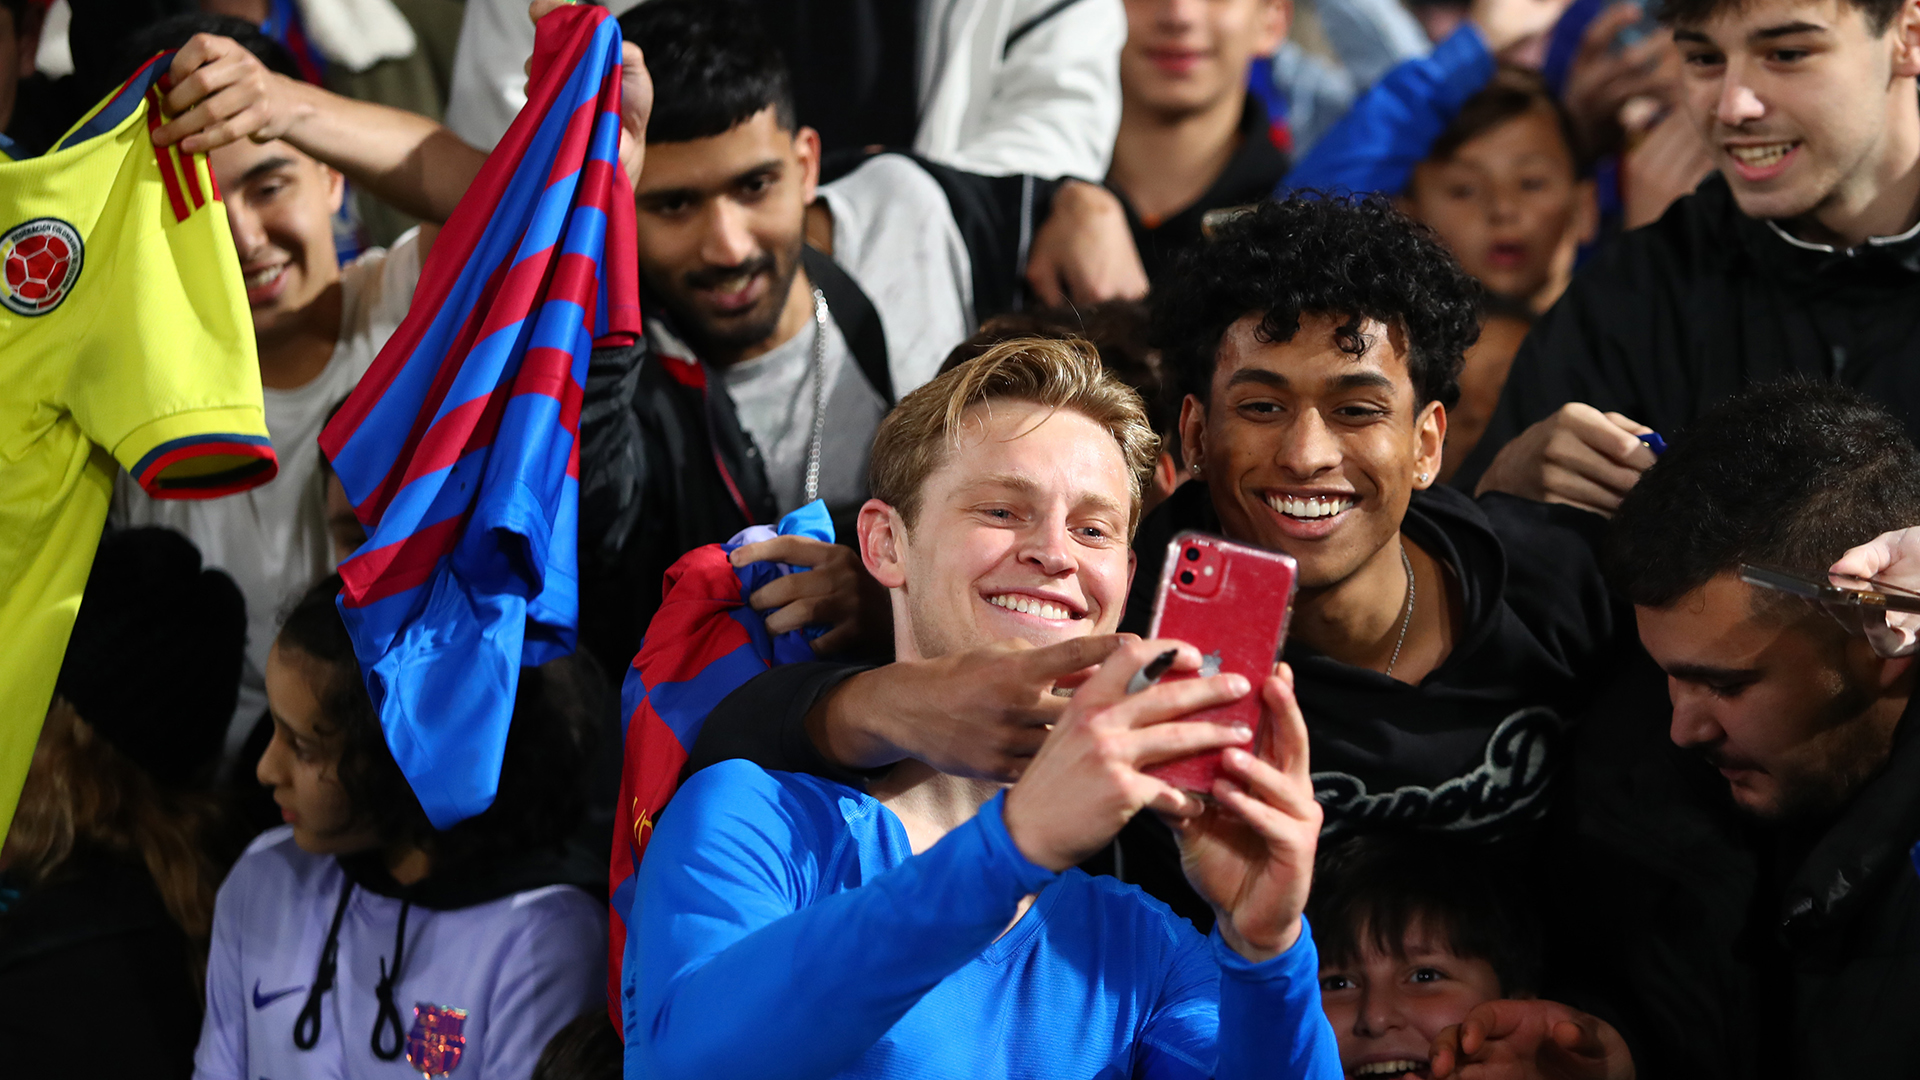 Frenkie de Jong of FC Barcelona takes a selfie with fans during the match between FC Barcelona and the A-League All Stars at Accor Stadium on May 25, 2022 in Sydney, Australia.